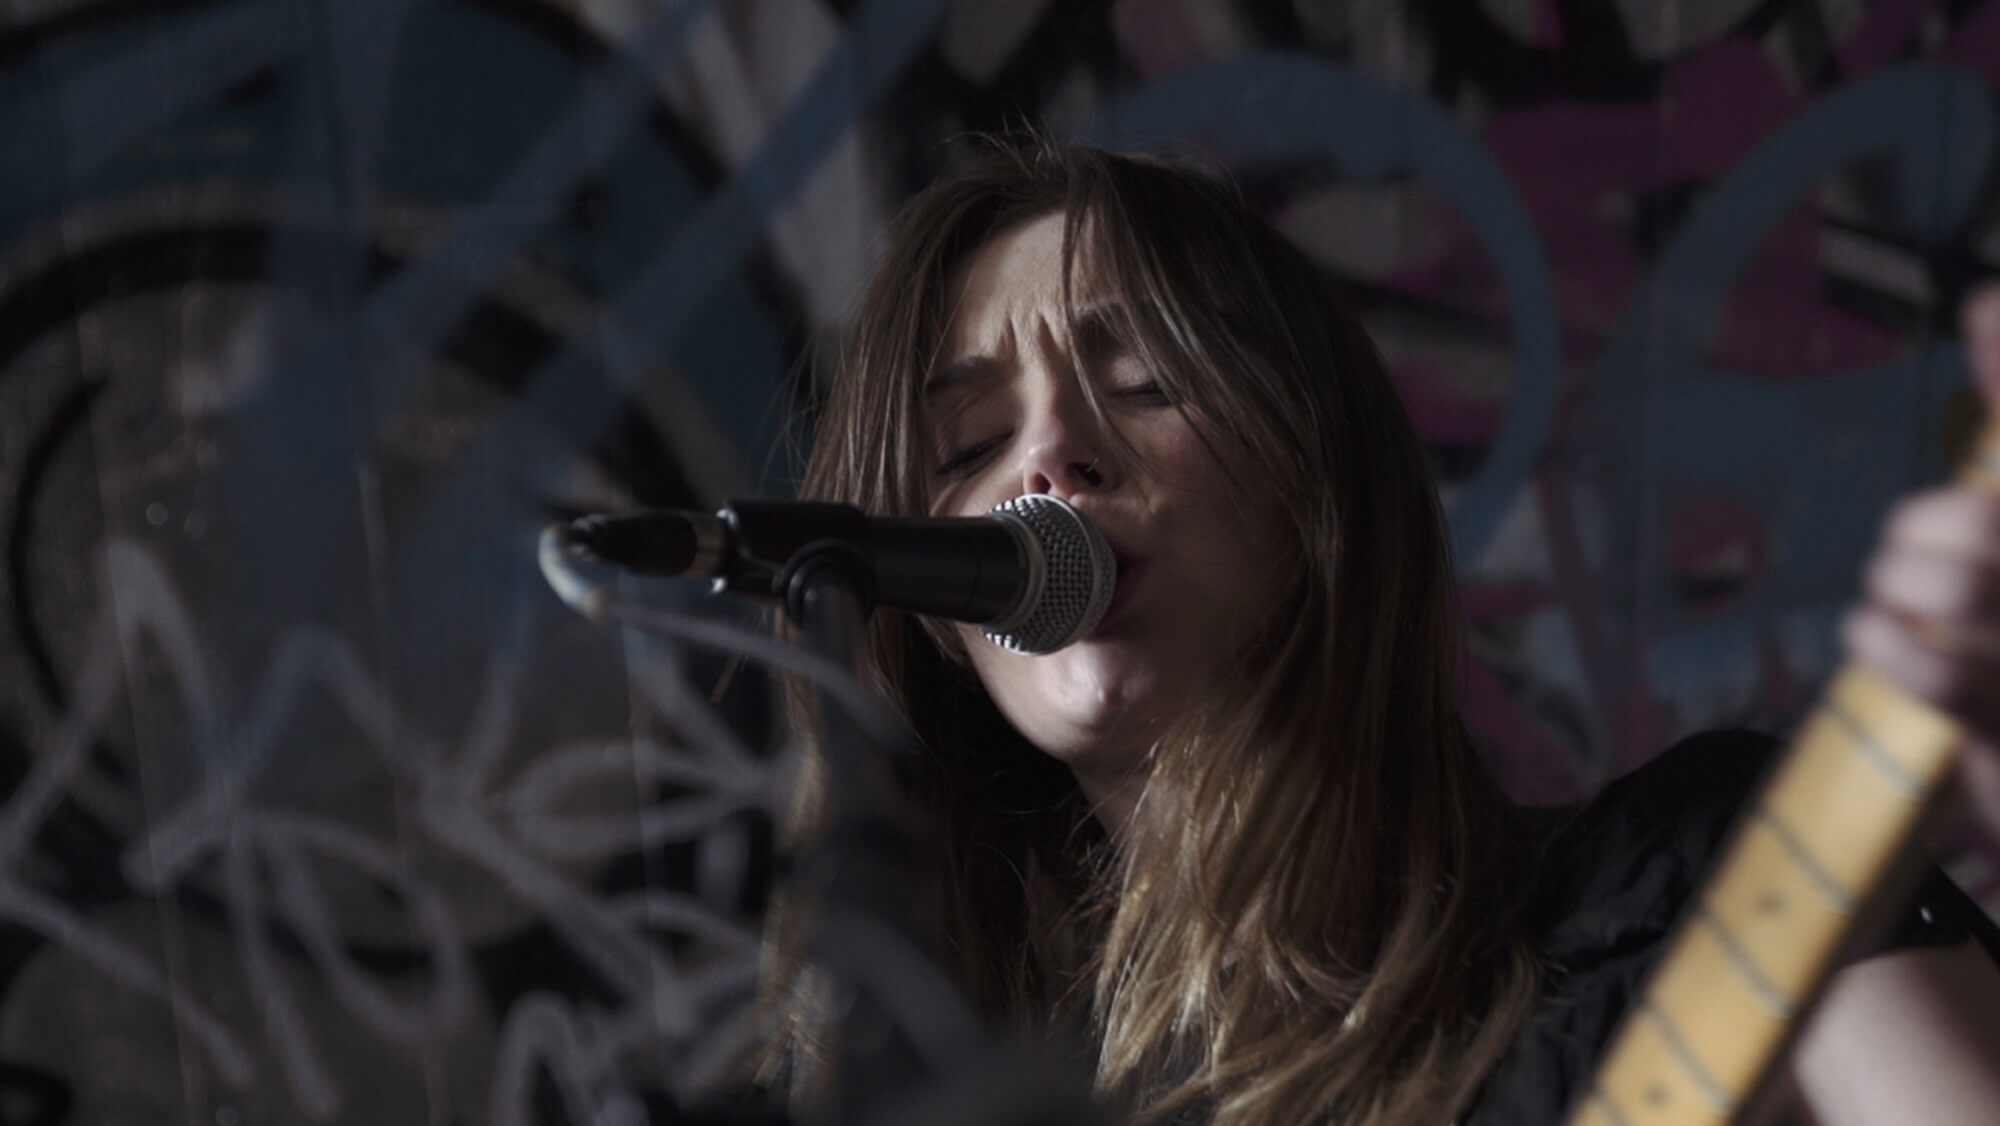 A close-up shot of the Honeyblood vocalist performing during the Dr Martens Flash Tour, from the Rise Media case studies archive